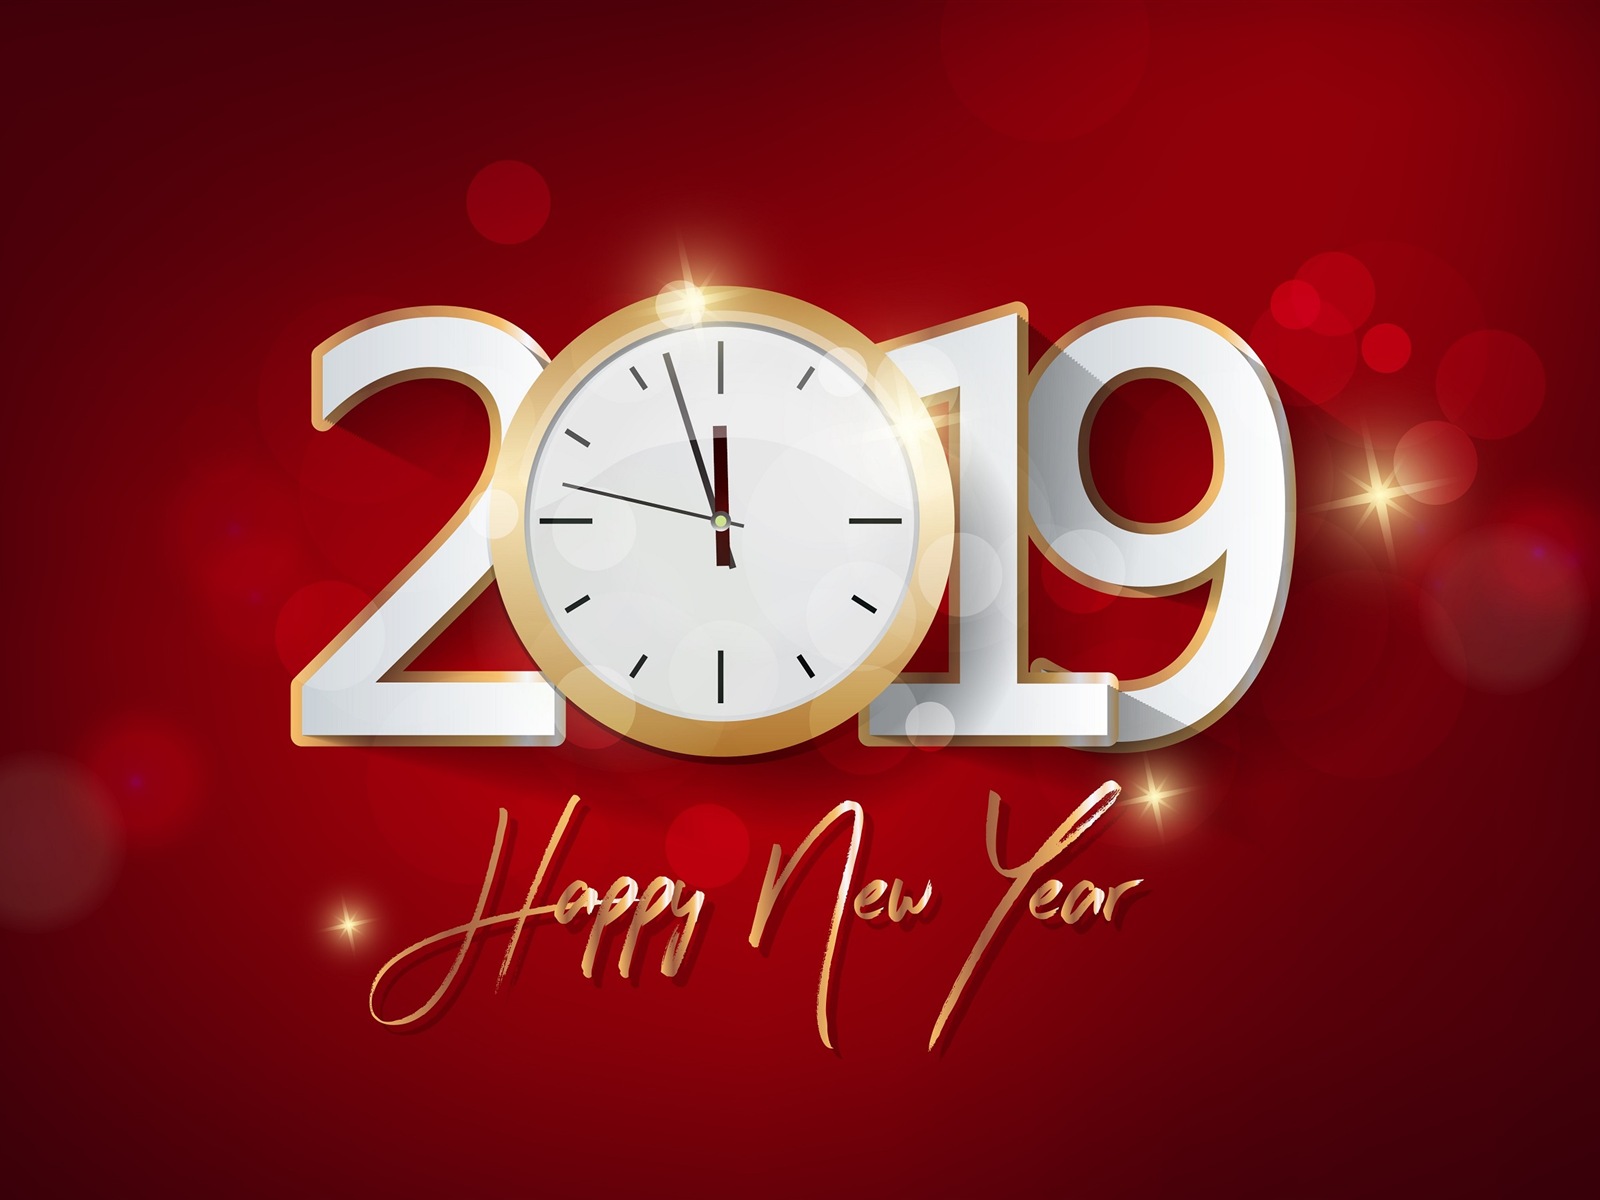 Happy New Year 2019 HD wallpapers #8 - 1600x1200